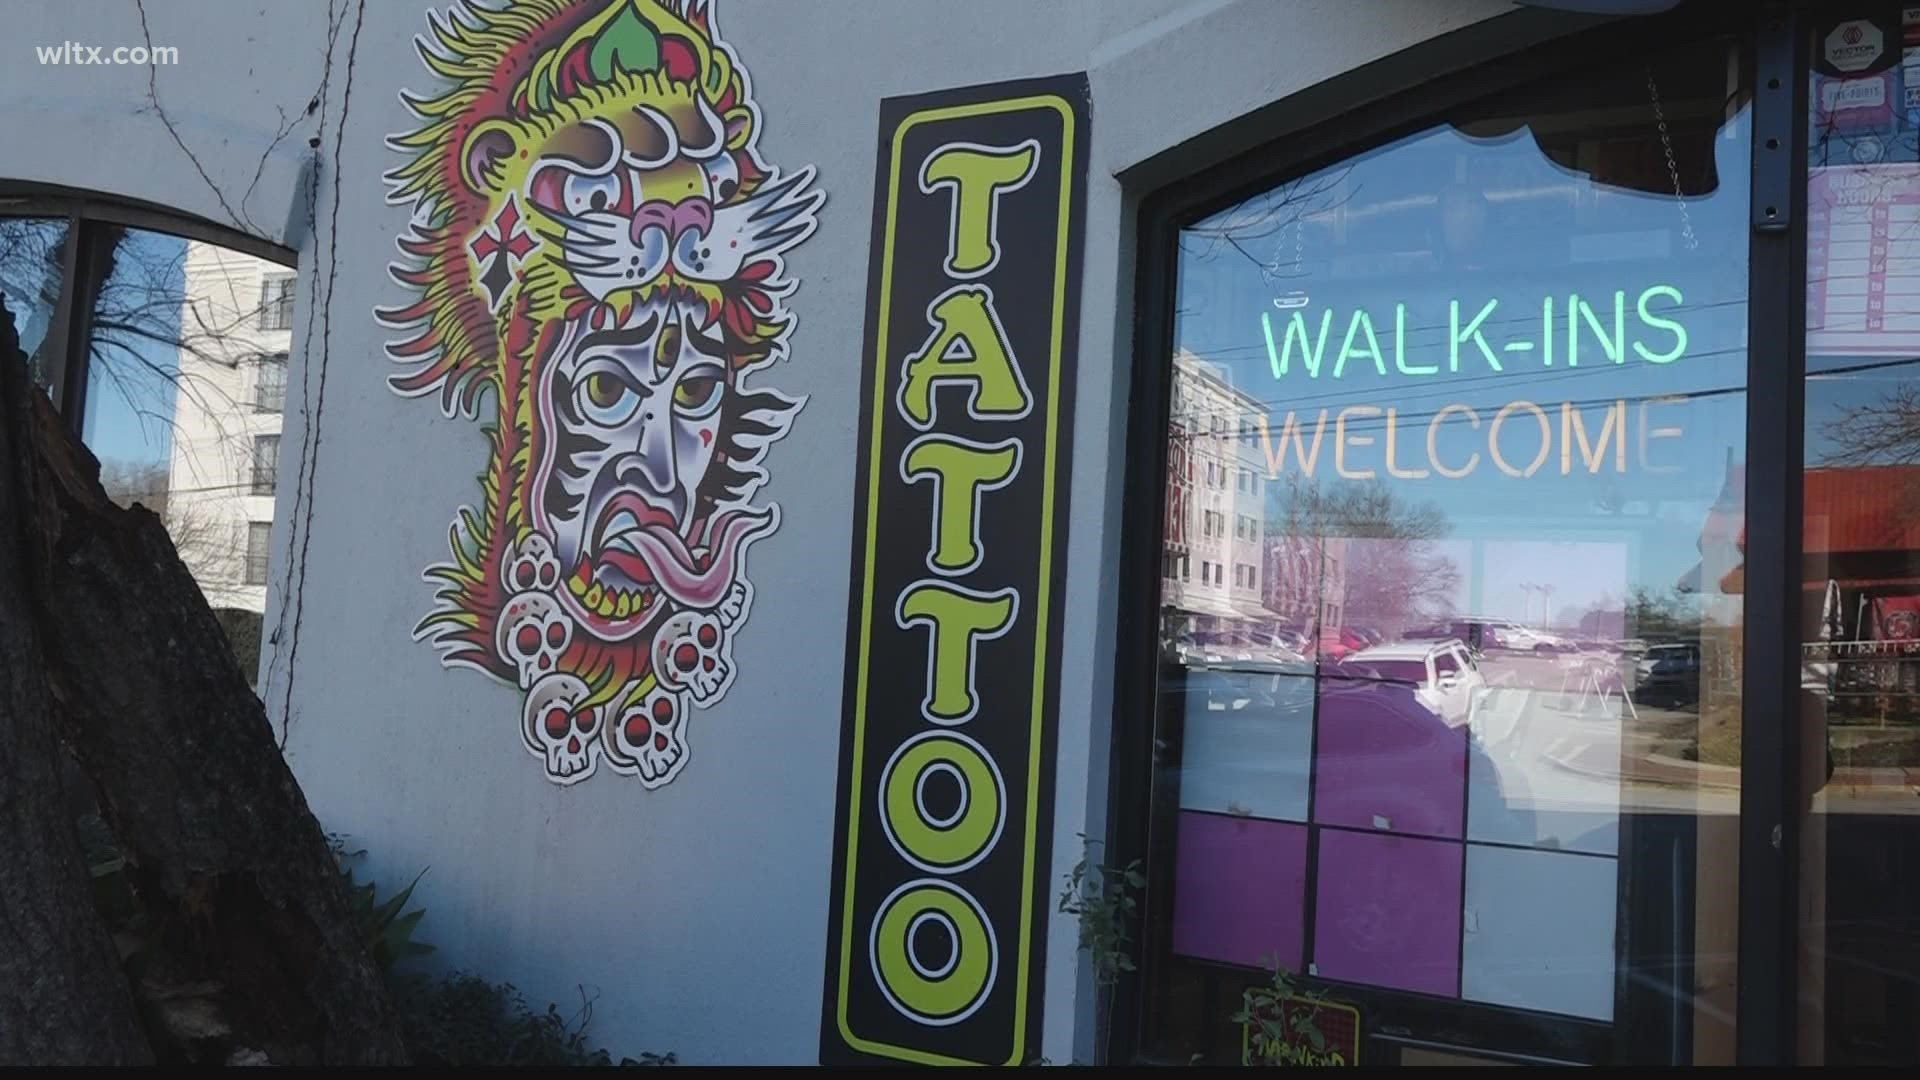 Tatoo shops have to be located 100 feet from a residential zoning district and also 1000 feet from any other tattoo shop and that includes body piercings too.